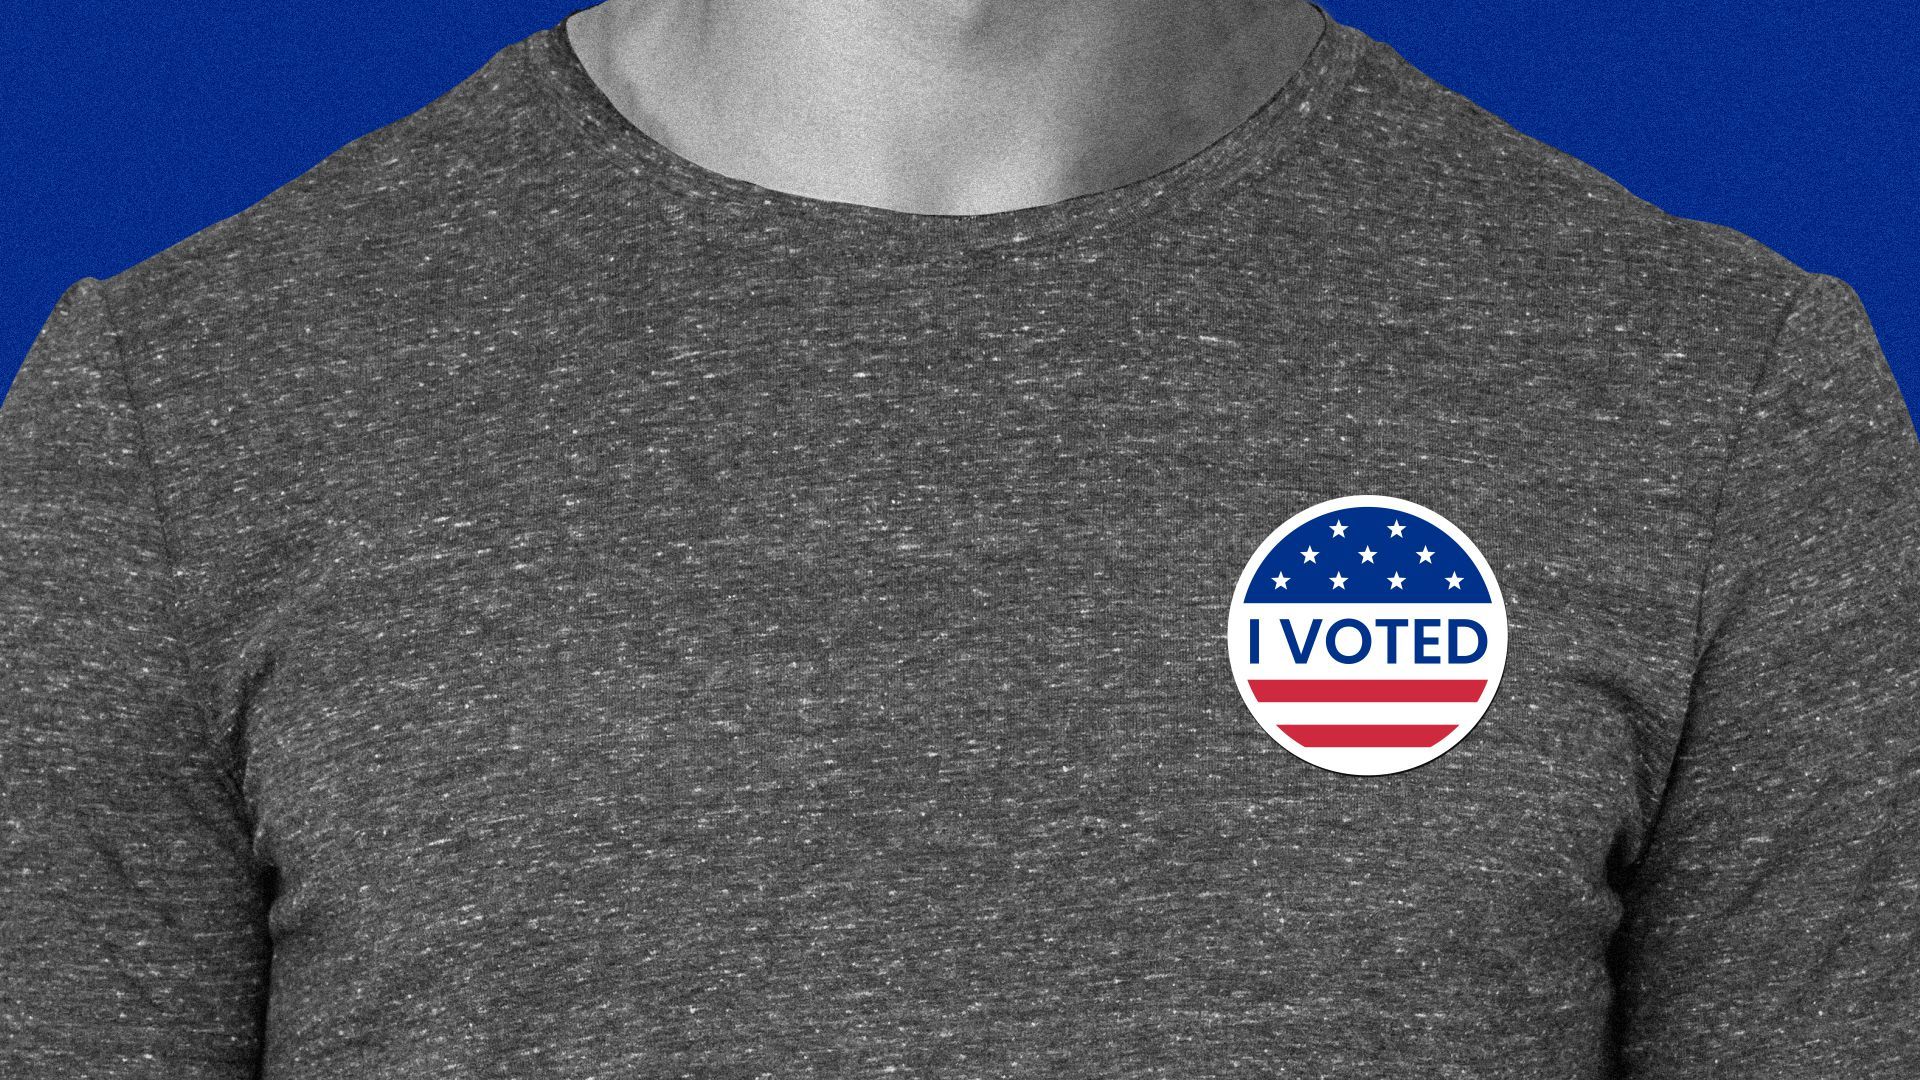 Illustration of a man placing a vote sticker on his shirt.